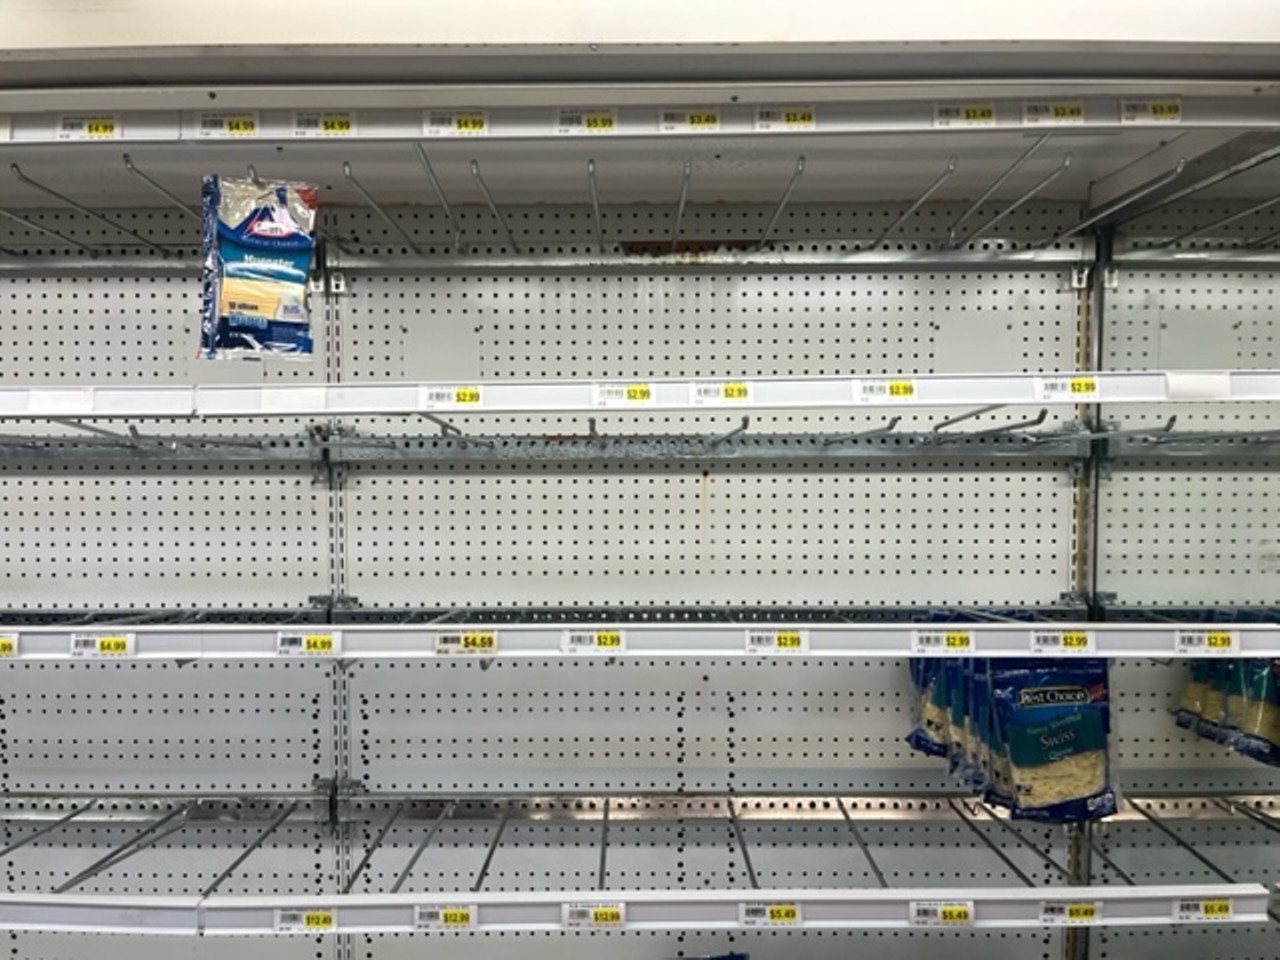 And yet more empty shelves on Lafayette Avenue.